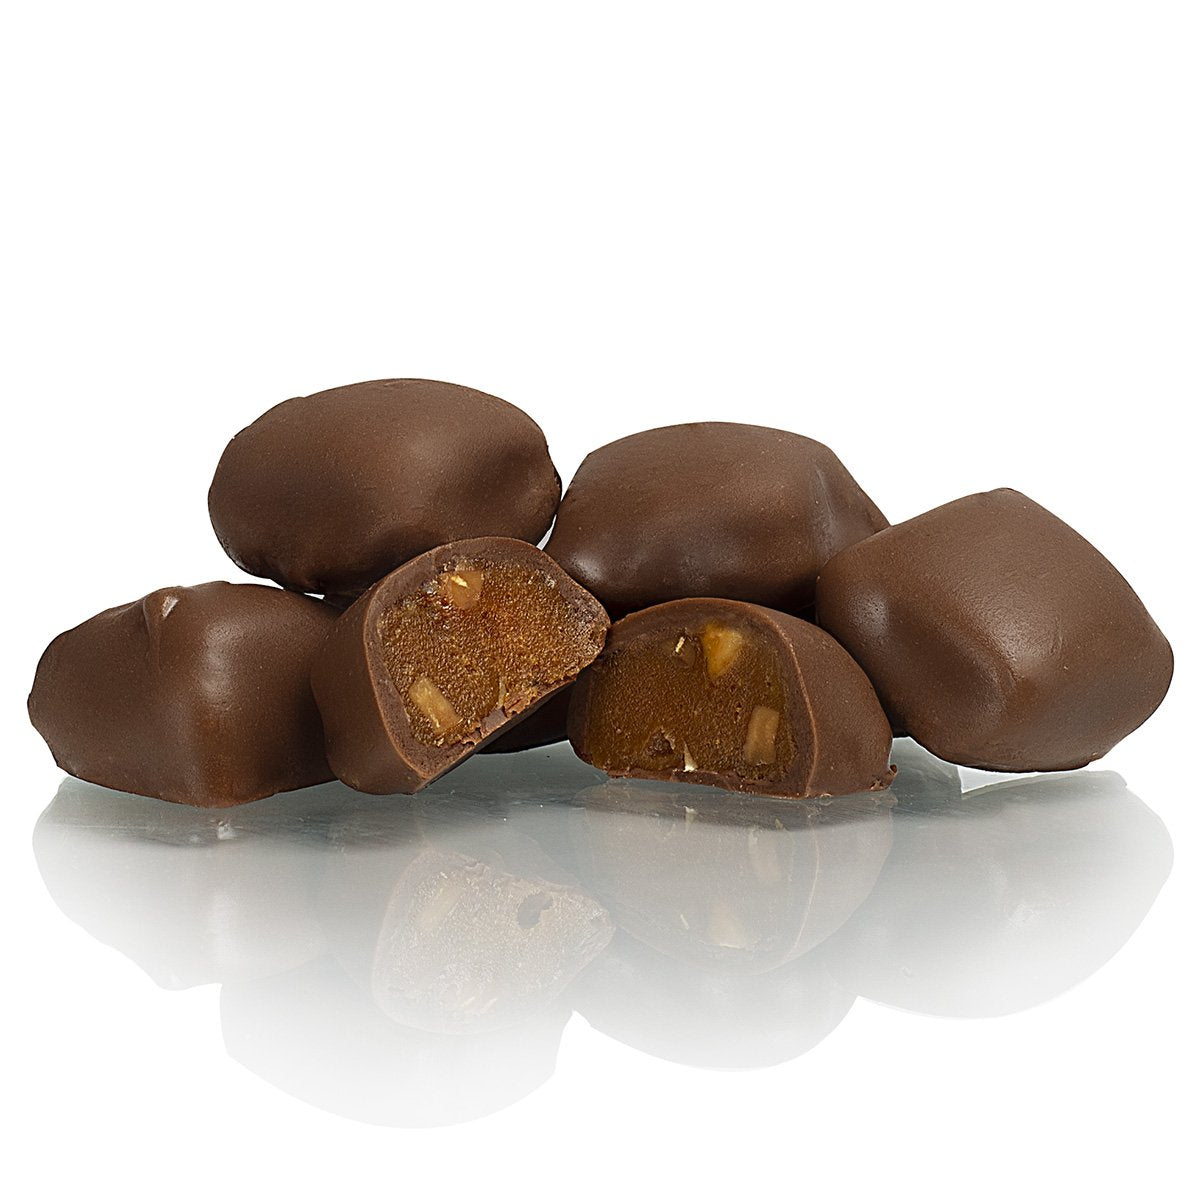 Save on M&M's Peanut Butter Chocolate Candies Eggs Order Online Delivery